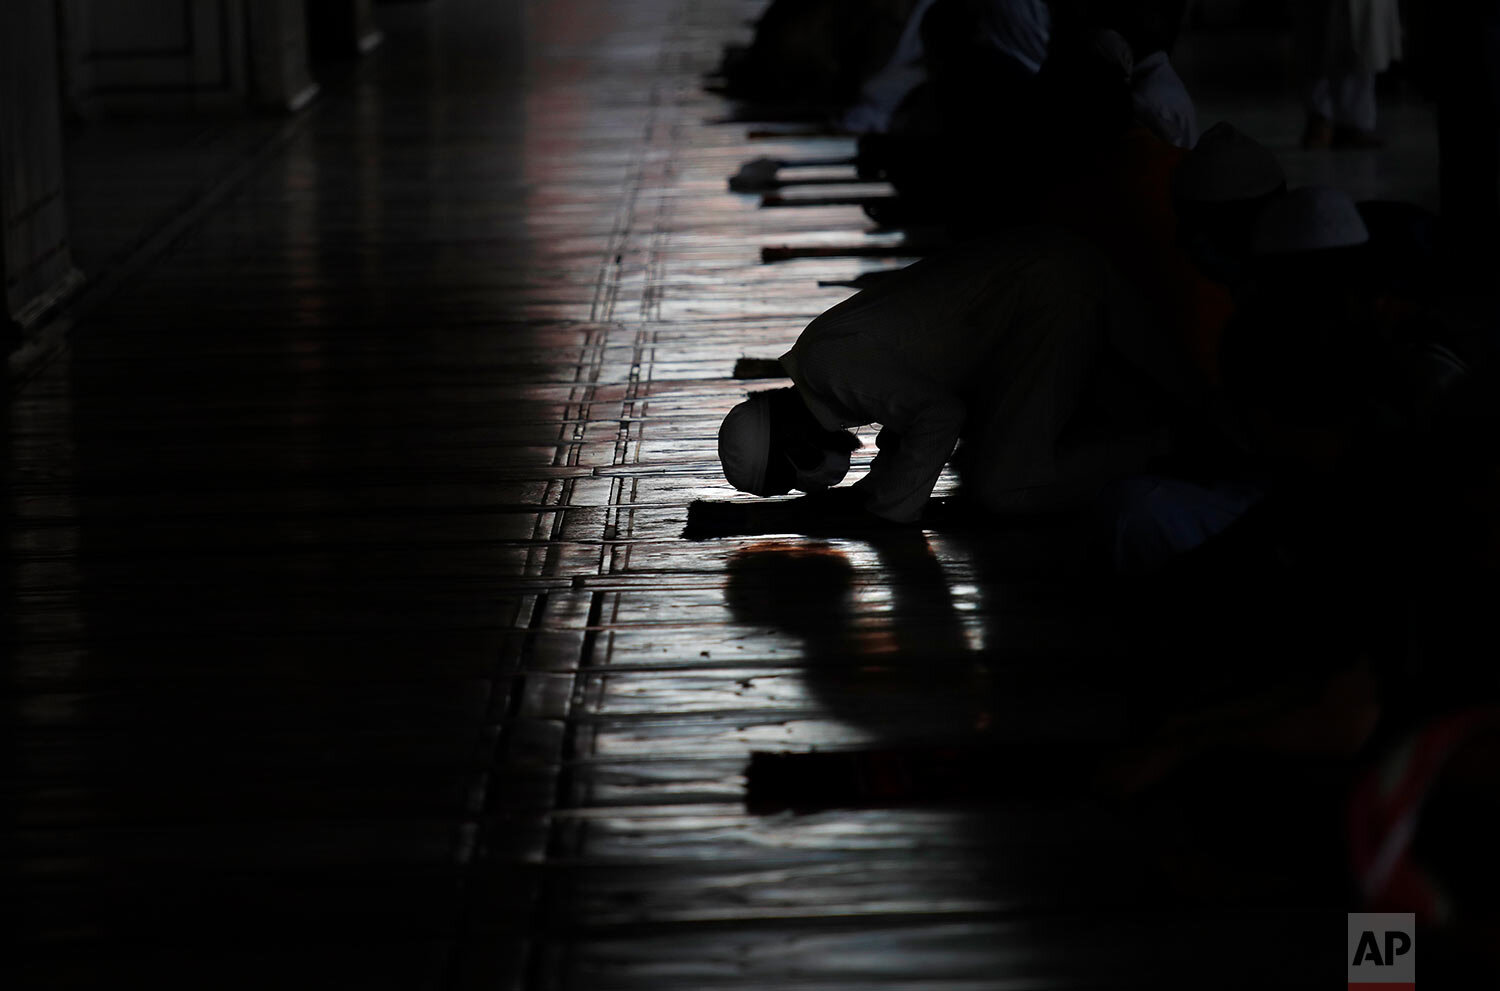  Indian Muslims offer prayers after Jama Mosque opened after lockdown in New Delhi, India, Monday, June 8, 2020. (AP Photo/Manish Swarup) 